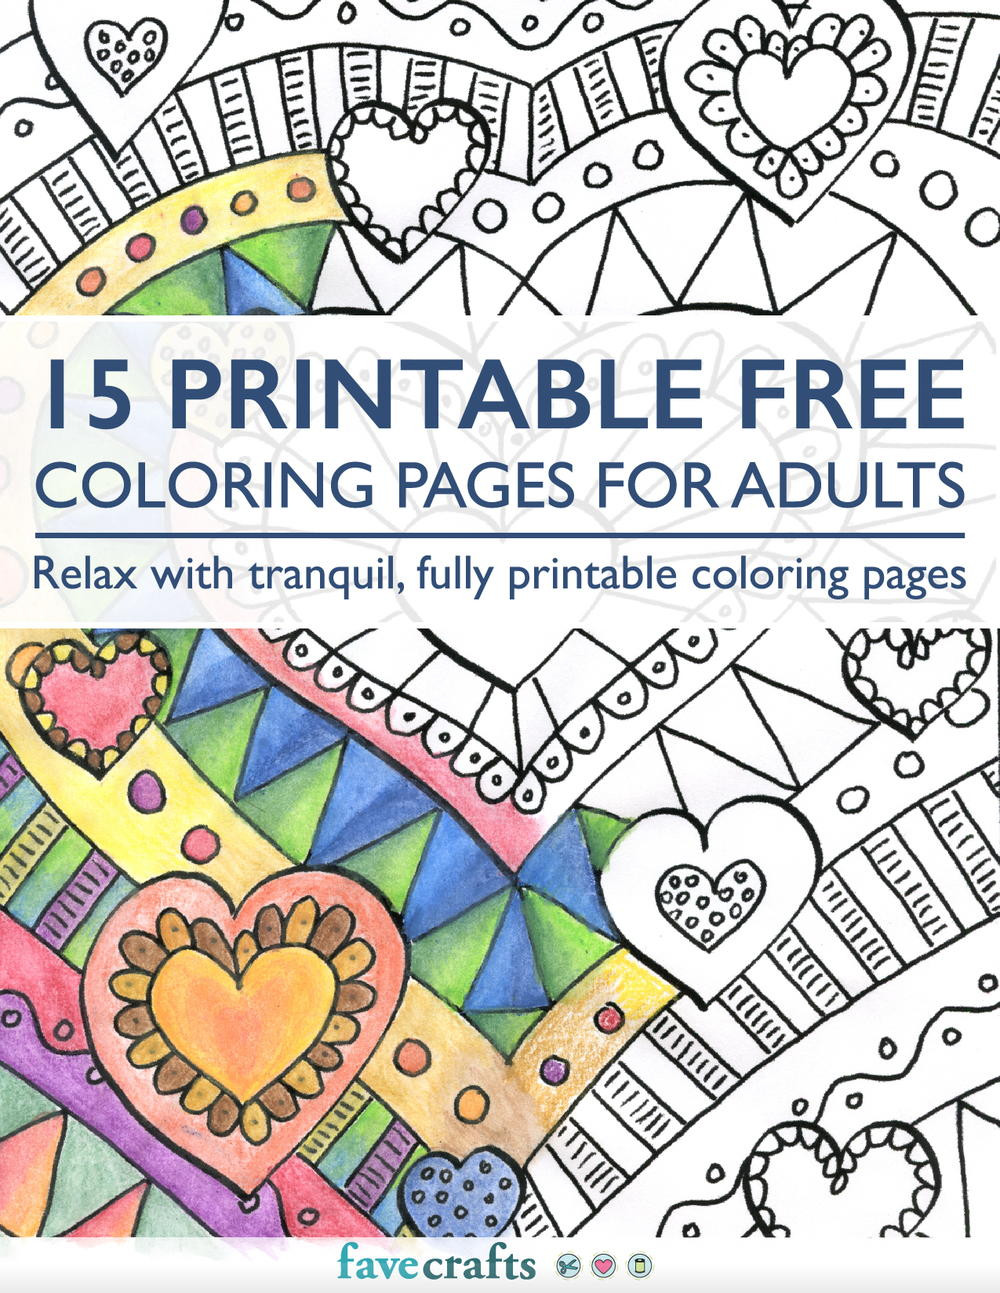 Adult Coloring Book Pages Free
 15 Printable Free Coloring Pages for Adults [PDF